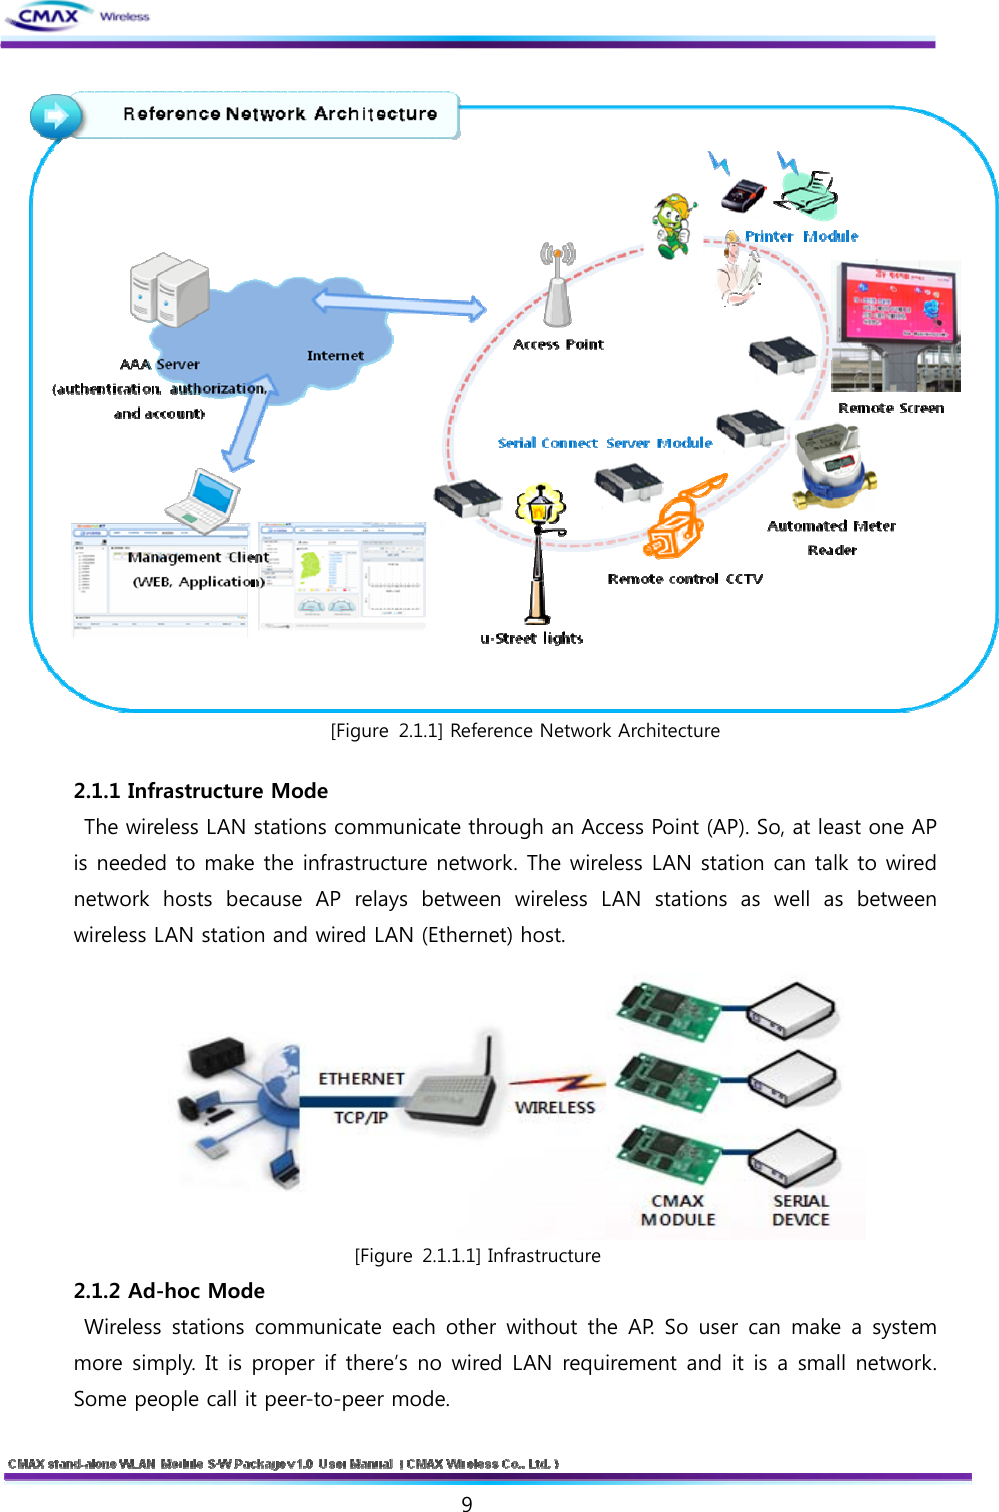   9   [Figure 2.1.1] Reference Network Architecture  2.1.1 Infrastructure Mode   The wireless LAN stations communicate through an Access Point (AP). So, at least one AP is needed to make the infrastructure network. The wireless LAN station can talk to wired network  hosts  because  AP  relays  between  wireless  LAN  stations  as  well  as  between wireless LAN station and wired LAN (Ethernet) host.  [Figure 2.1.1.1] Infrastructure 2.1.2 Ad-hoc Mode   Wireless stations  communicate each  other  without the  AP. So  user can  make  a  system more simply.  It is proper if there’s no wired  LAN  requirement and it is a small network. Some people call it peer-to-peer mode. 